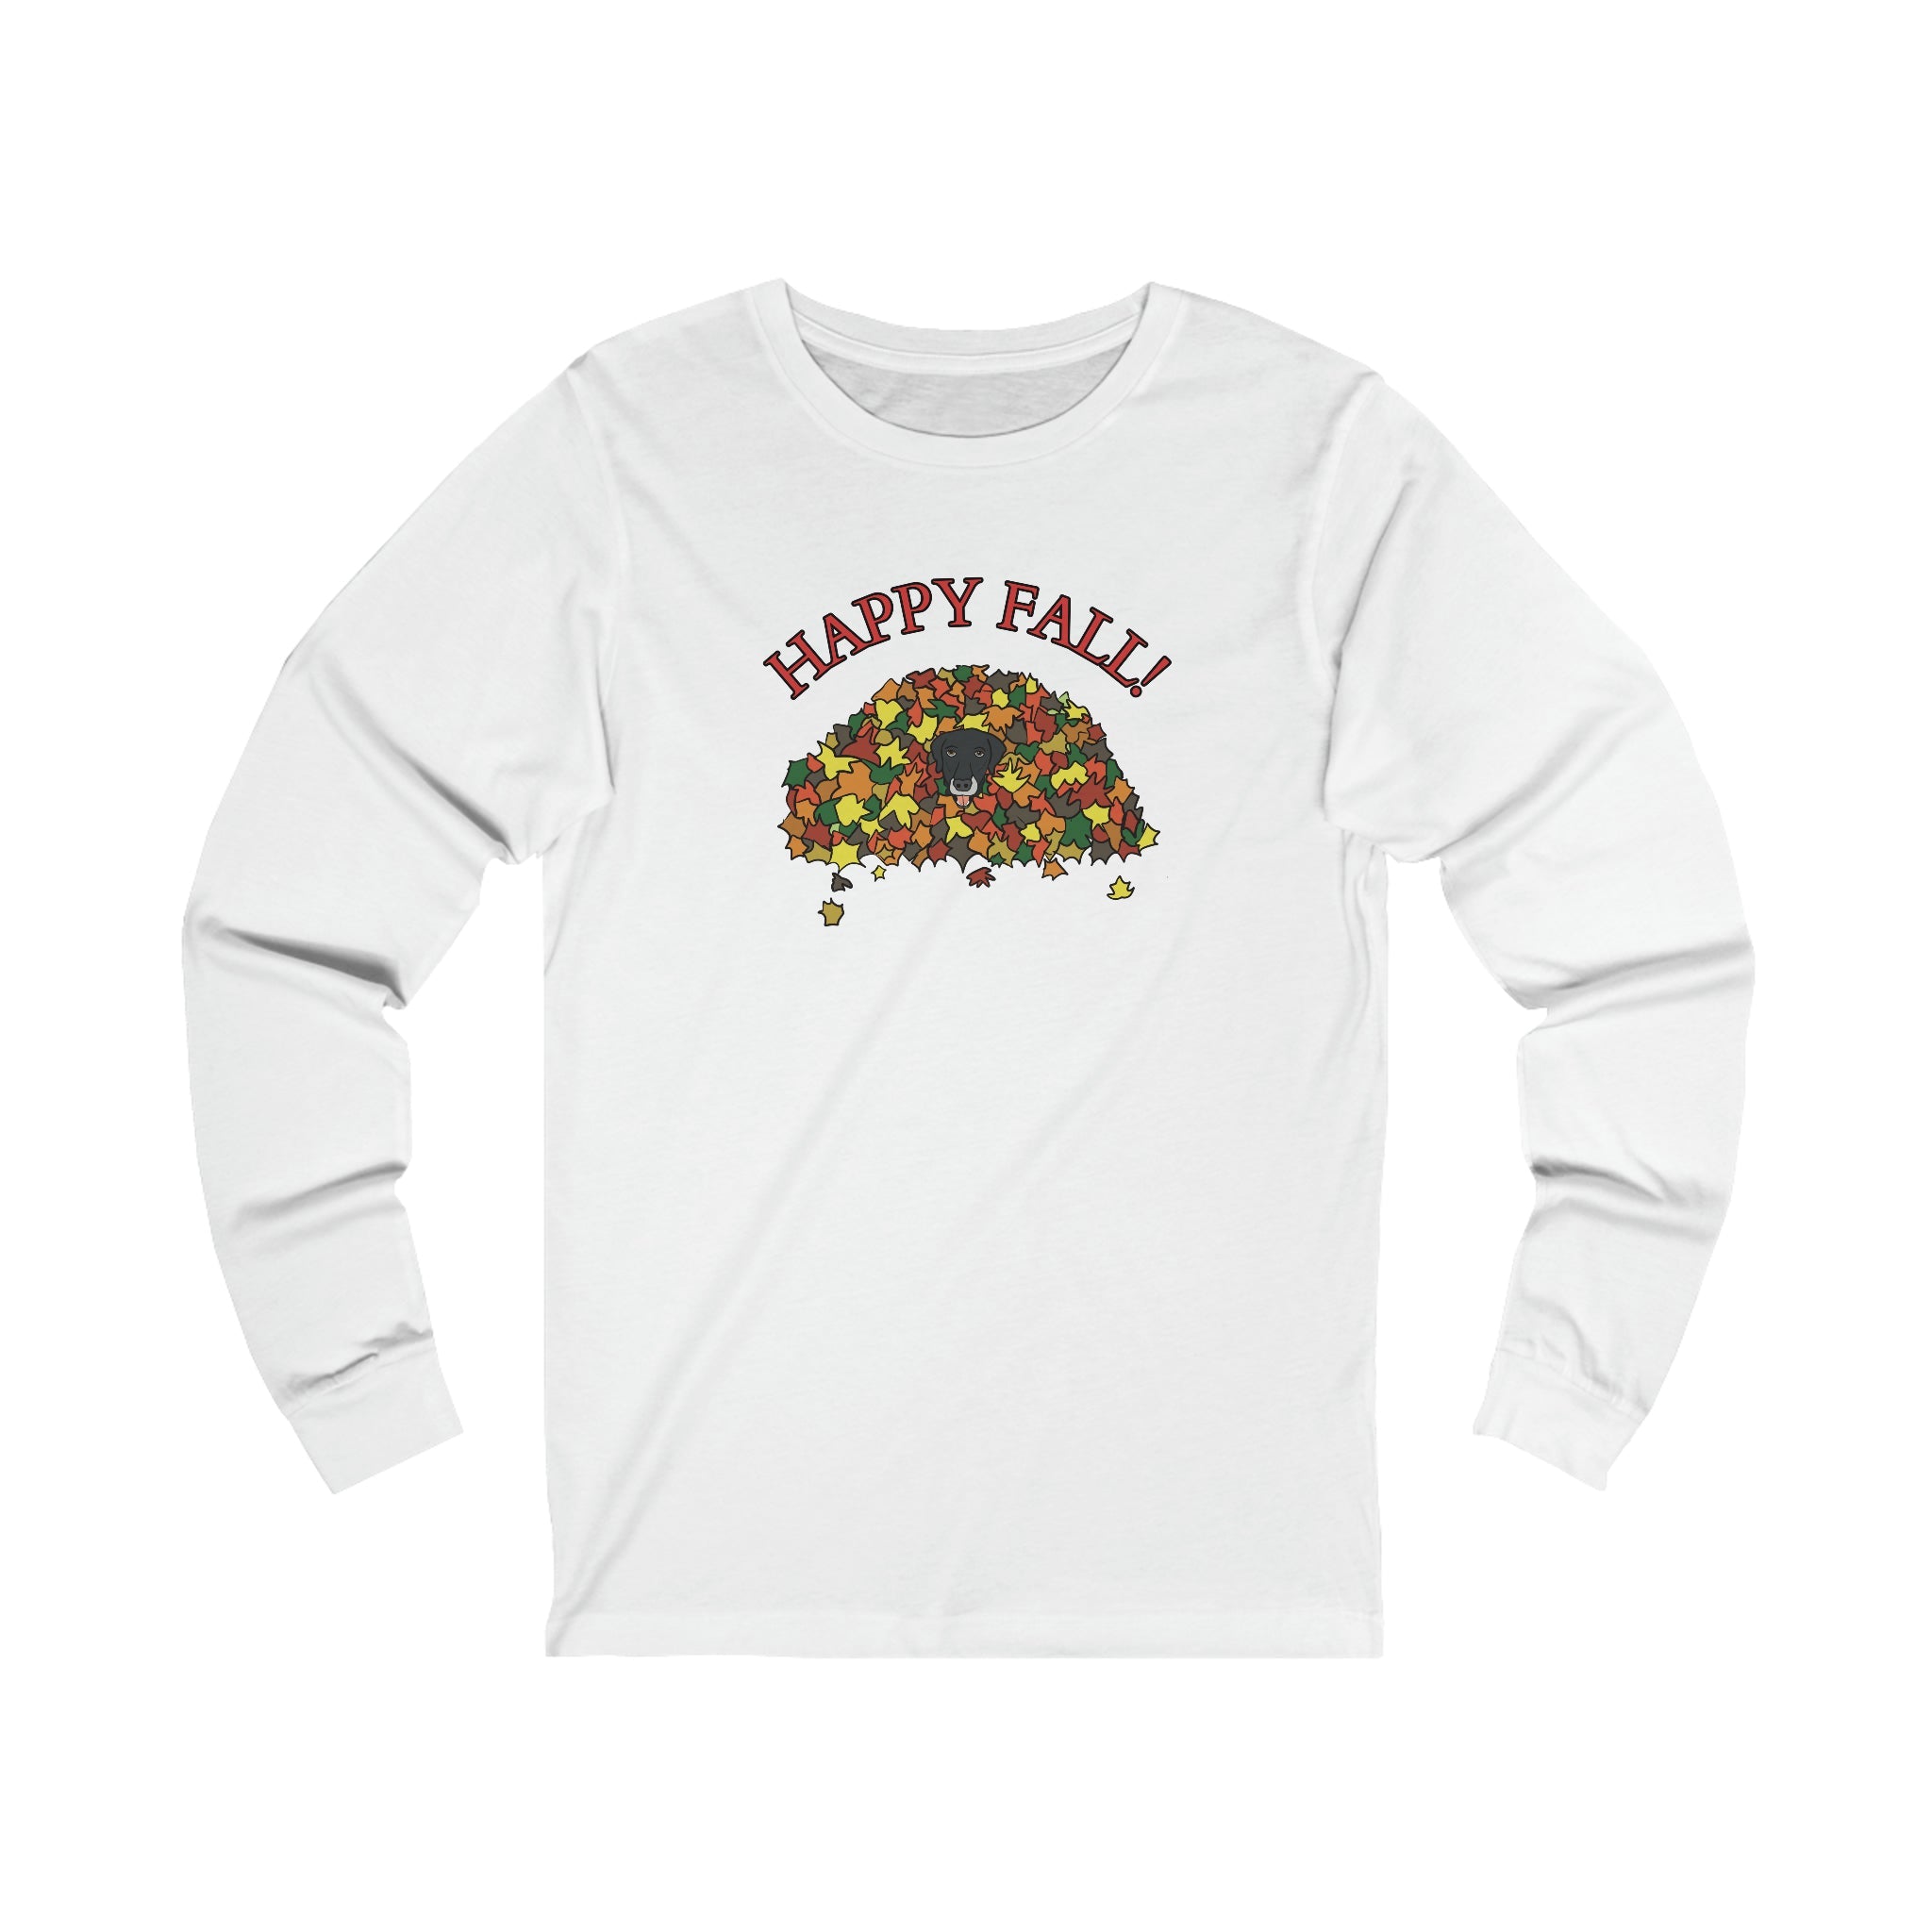 Hiding in the Leaf Pile Long Sleeve Tee - TAILWAGS UNLIMITED